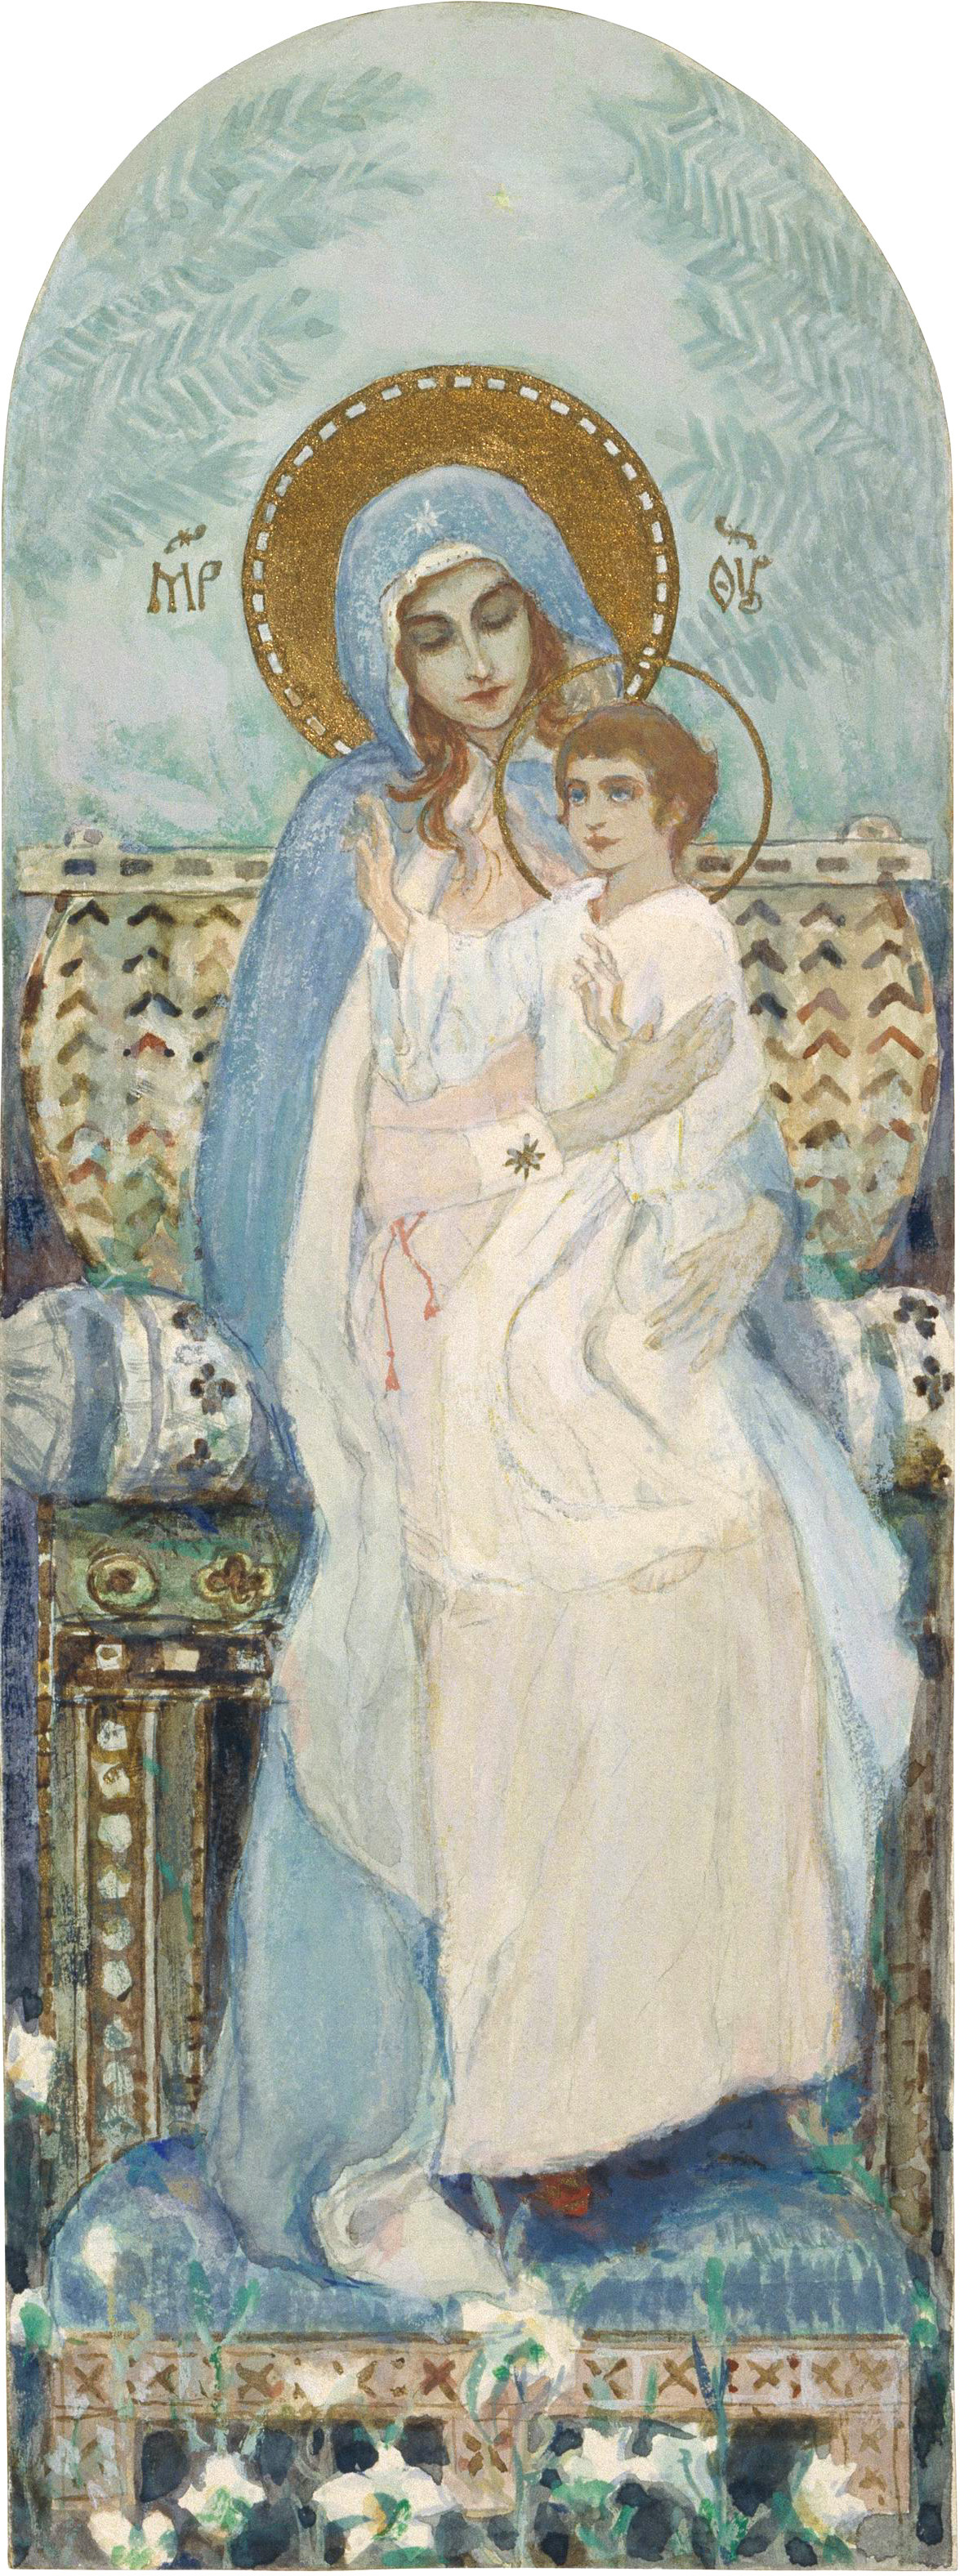 Mikhail Vasilyevich Nesterov. The virgin and child. The sketch for the painting of the iconostasis of the Vladimir Cathedral in Kiev